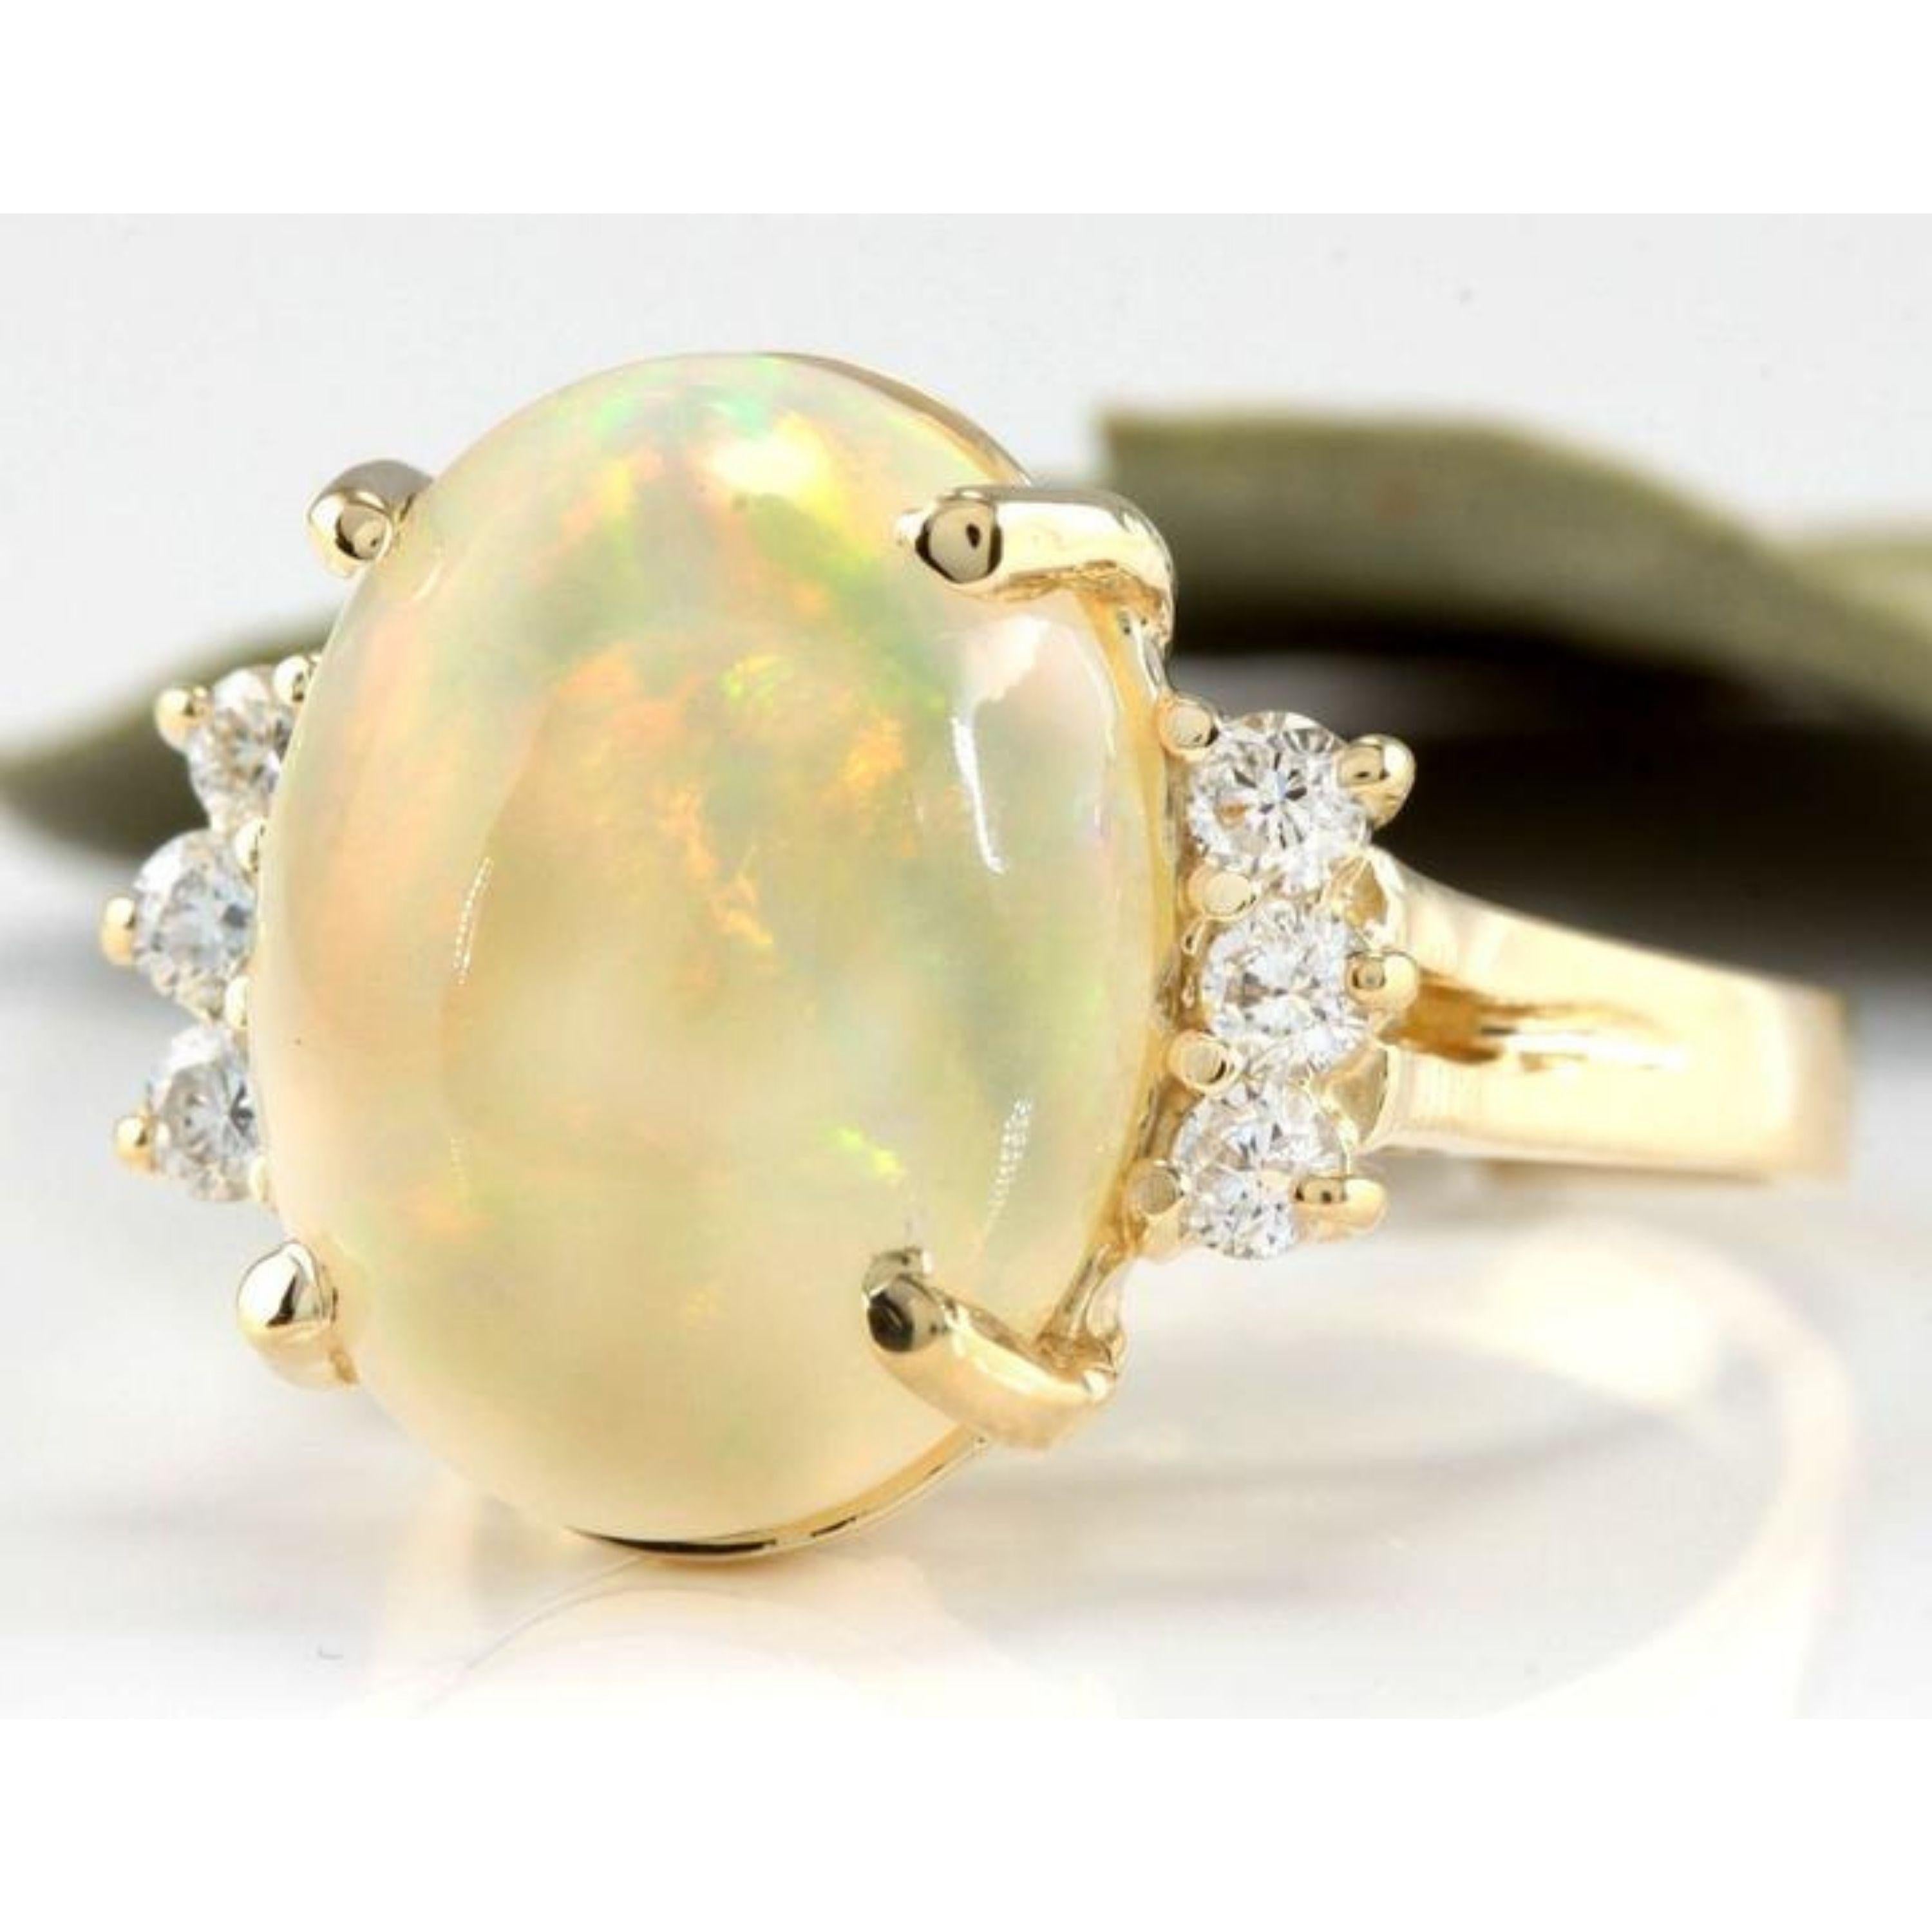 6.30 Carats Natural Impressive Ethiopian Opal and Diamond 14K Solid Yellow Gold Ring

Total Natural Opal Weight is: Approx. 6.00 Carats

Opal Measures: 14.50 x 11.40mm

Natural Round Diamonds Weight: Approx. 0.30 Carats (color G-H / Clarity